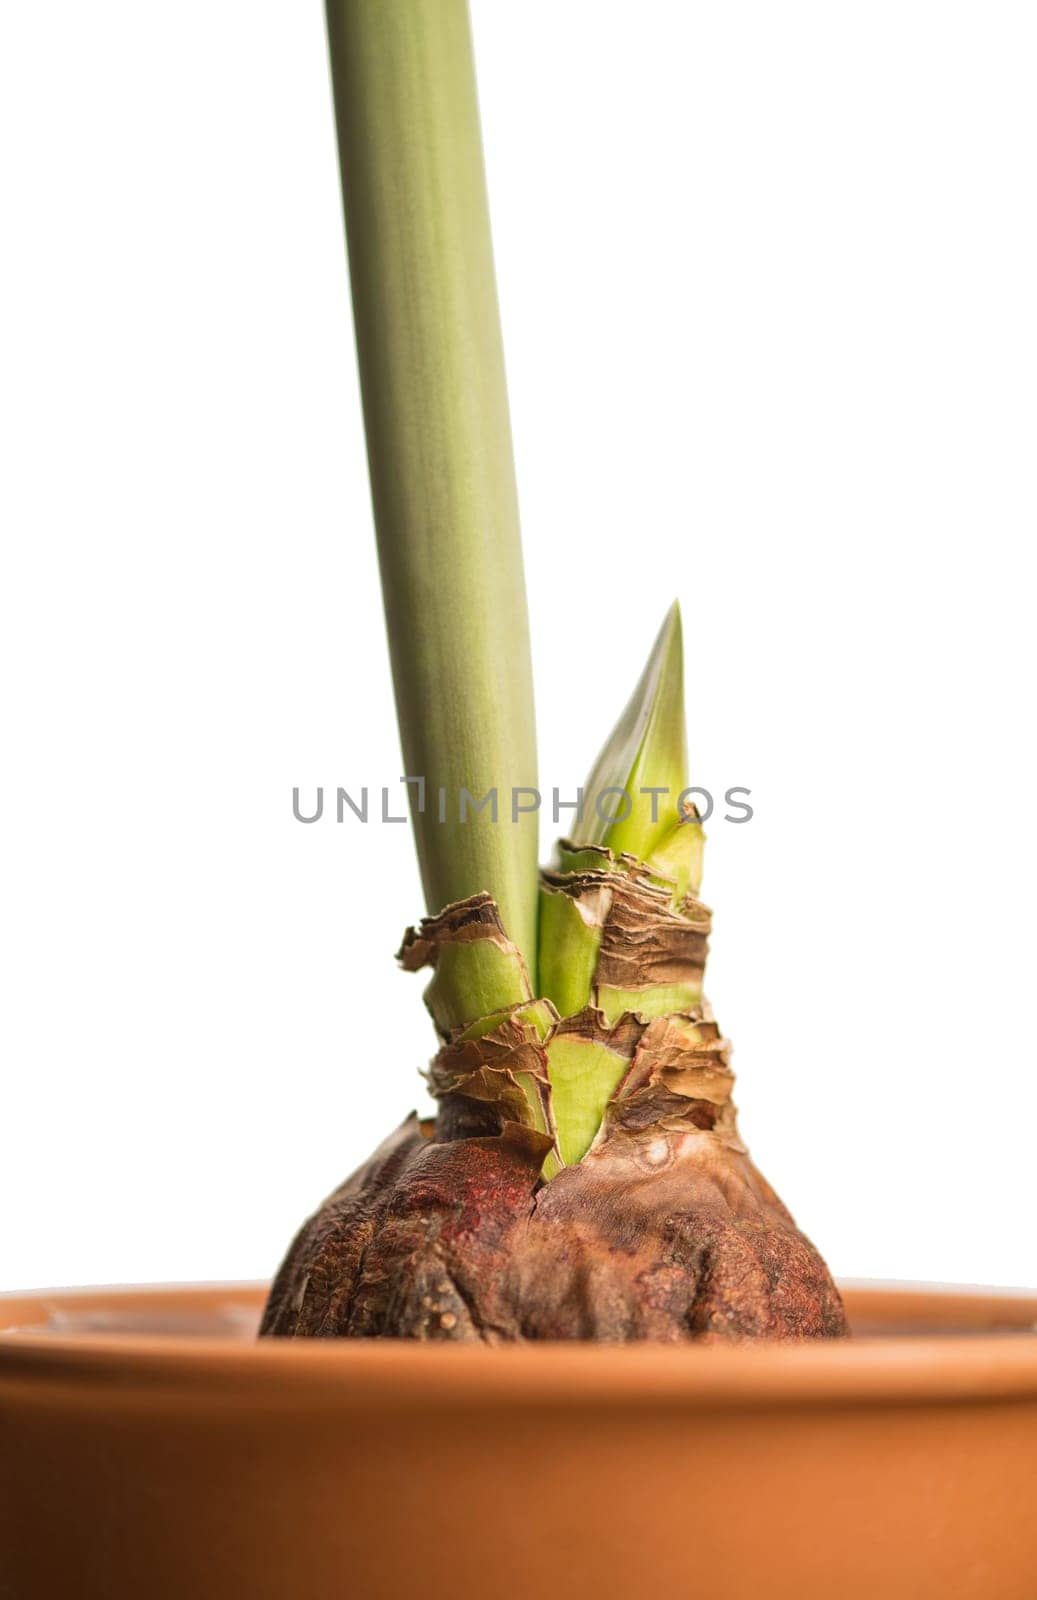 Hippeastrum or amaryllis flowers, growing bud, amaryllis sprout, isolated on white background, with clipping path by aprilphoto